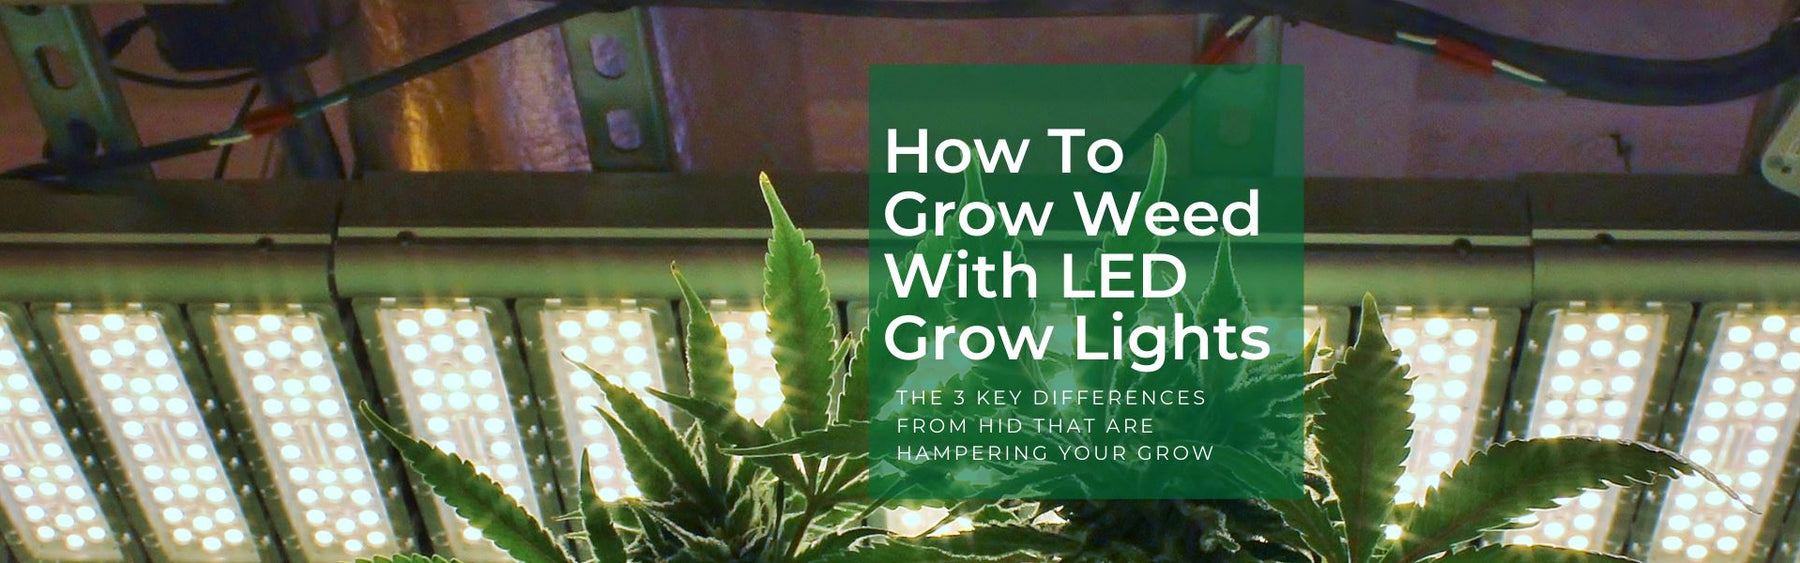 How To Grow Weed With LED Grow Lights - 3 Key Differences From HID Are Hampering Your Grow